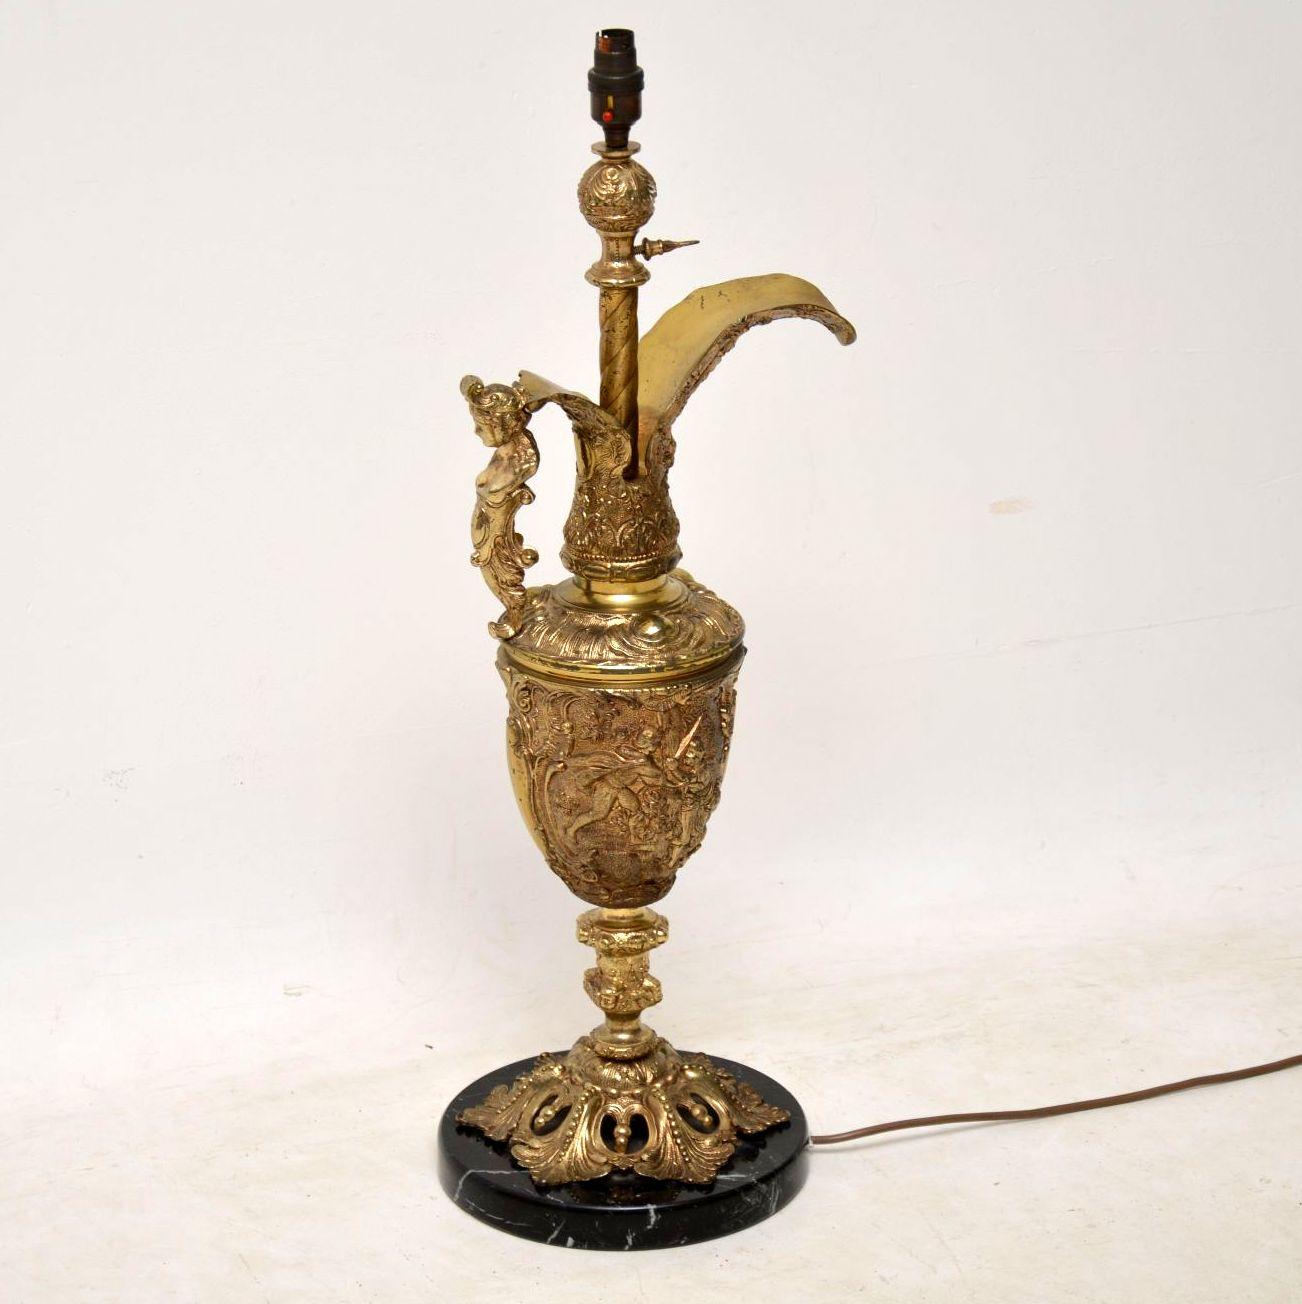 Large antique gilt metal lamp sitting on a marble base. It’s in excellent condition and has just been re-wired. This lamp is in the shape of a flagon with beautiful relief decoration all over. I would say it dates to circa 1950s period.

Measures: